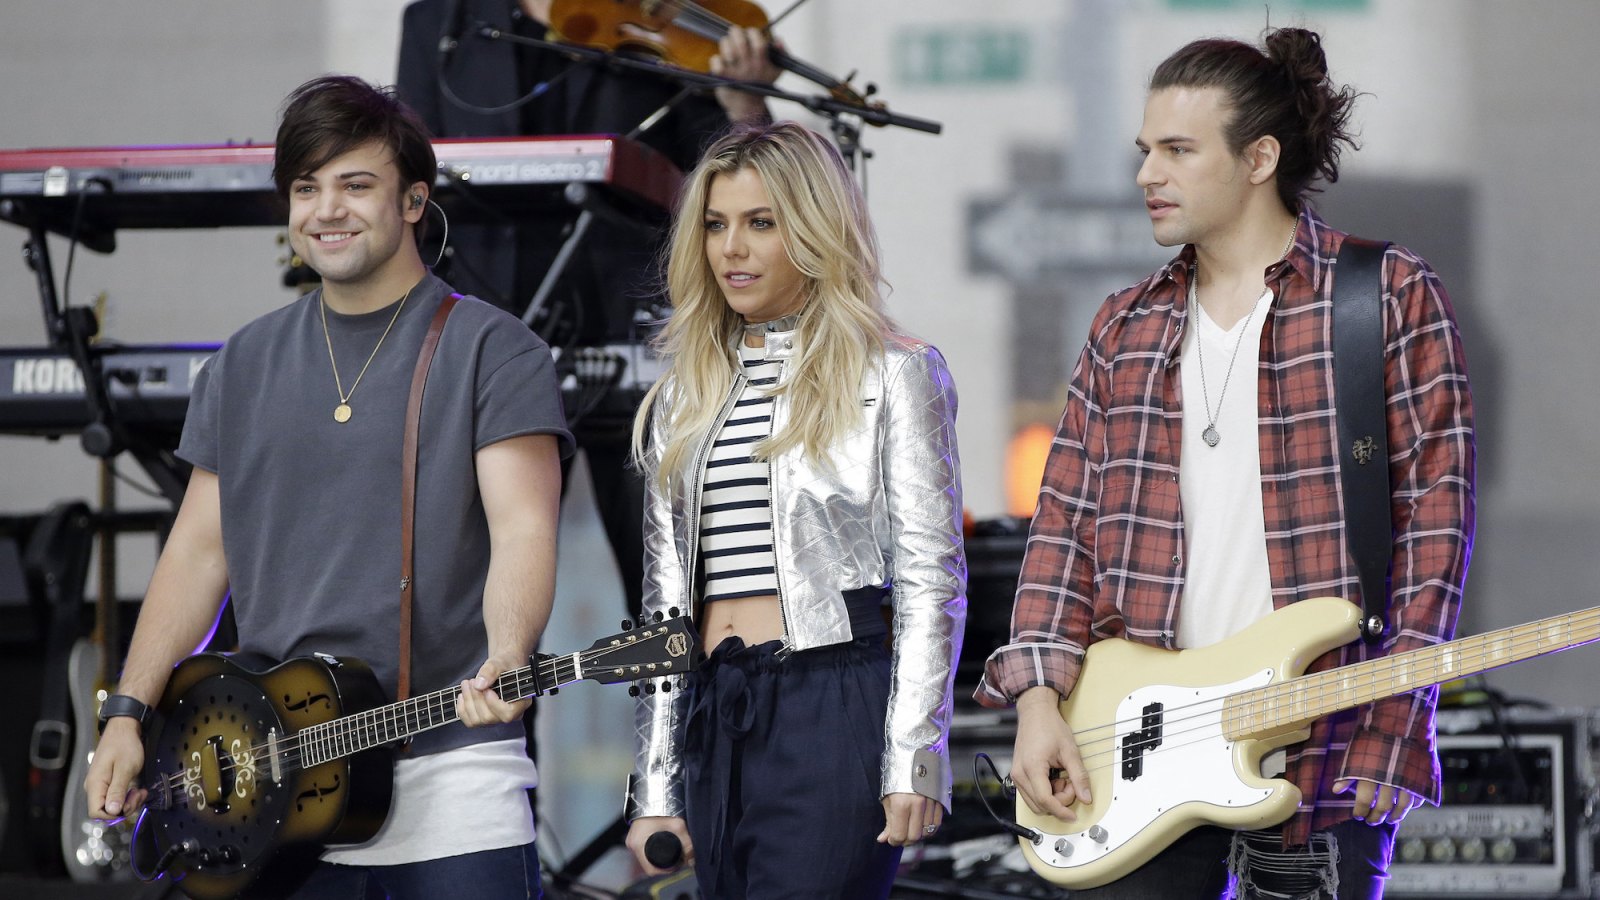 The Band Perry Announces That They're Taking a 'Creative Break' to Focus on Their Individual Pursuits